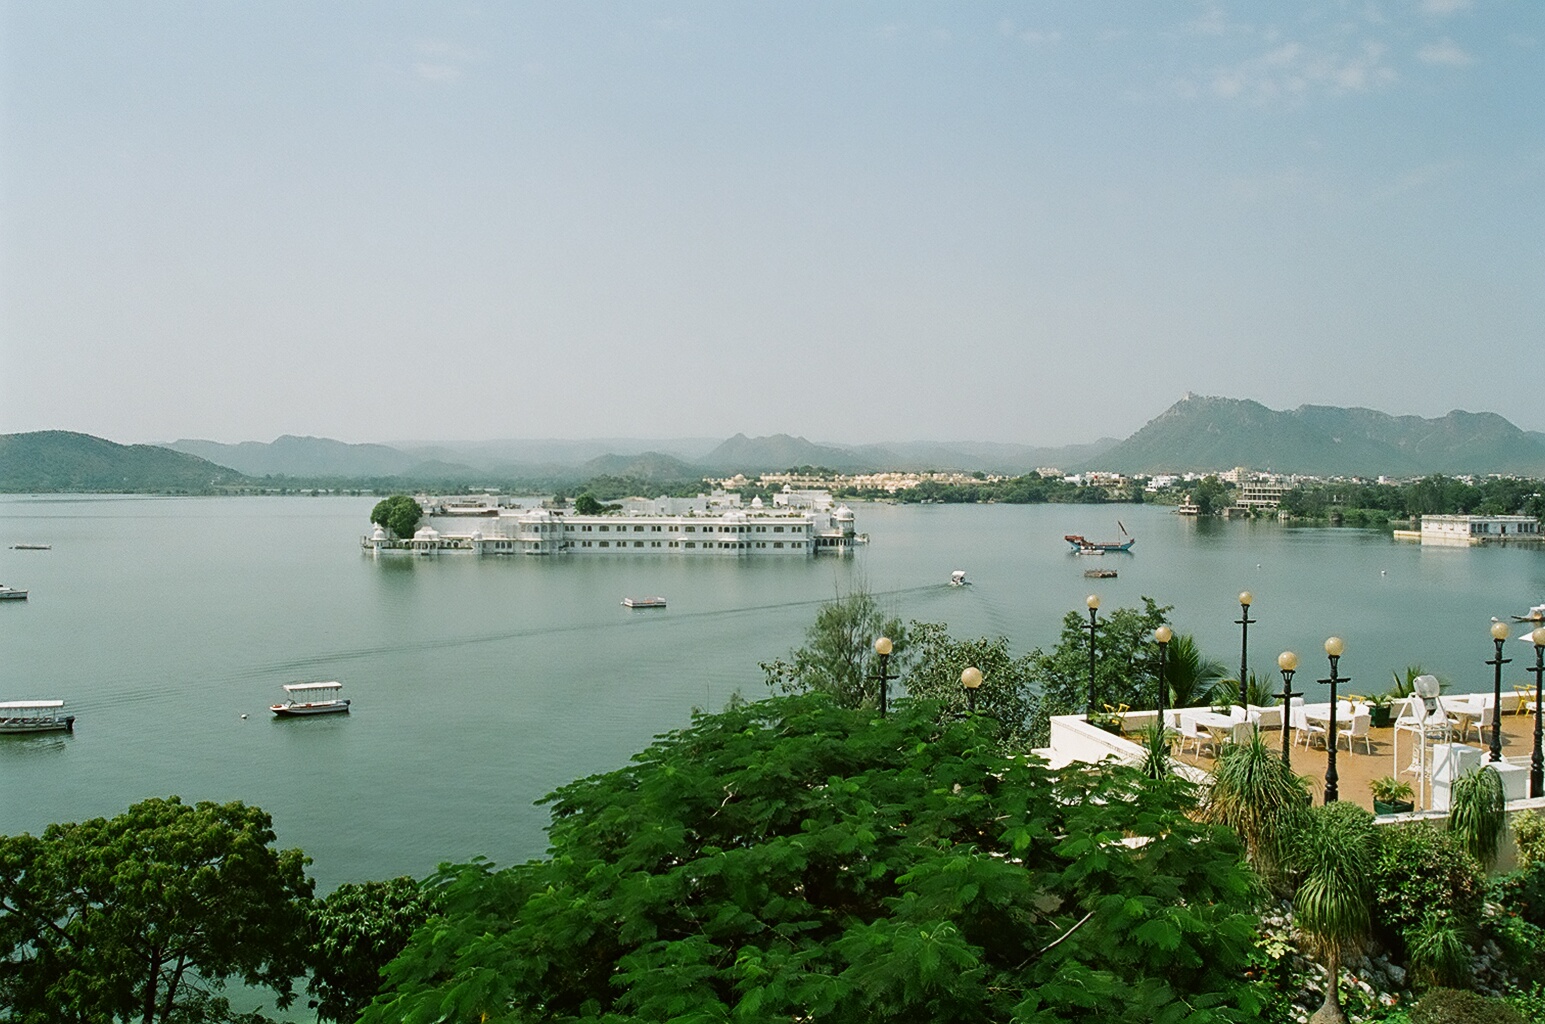 Artificial lake Pichola with four Islands